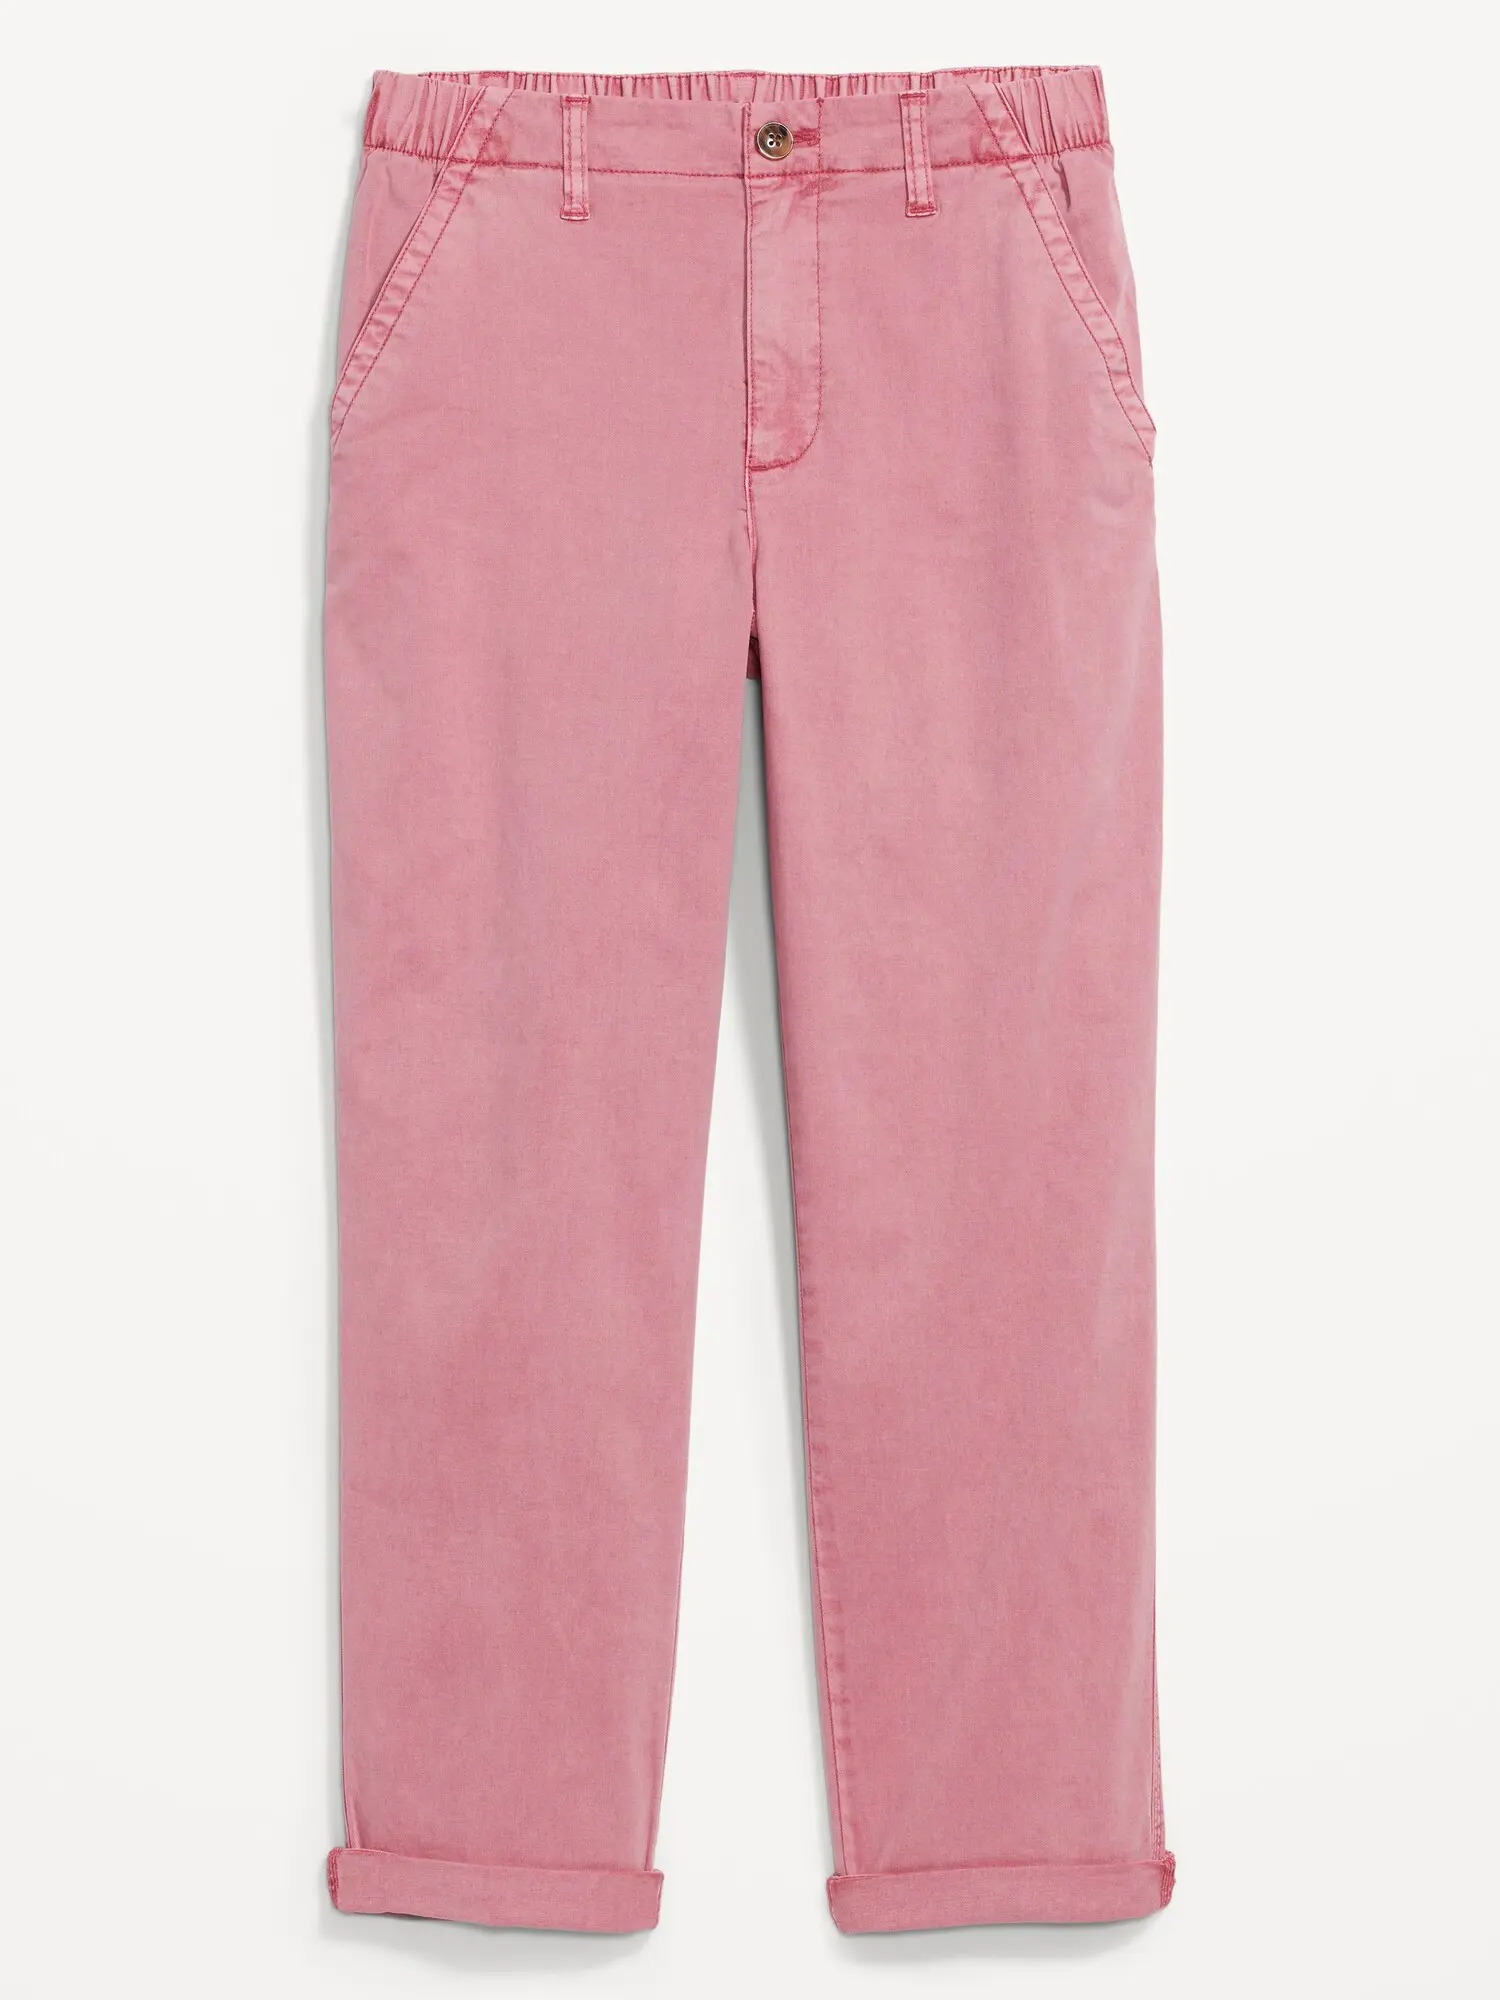 Old Navy High-Waisted OGC Chino Pants for Women pink - 792006162